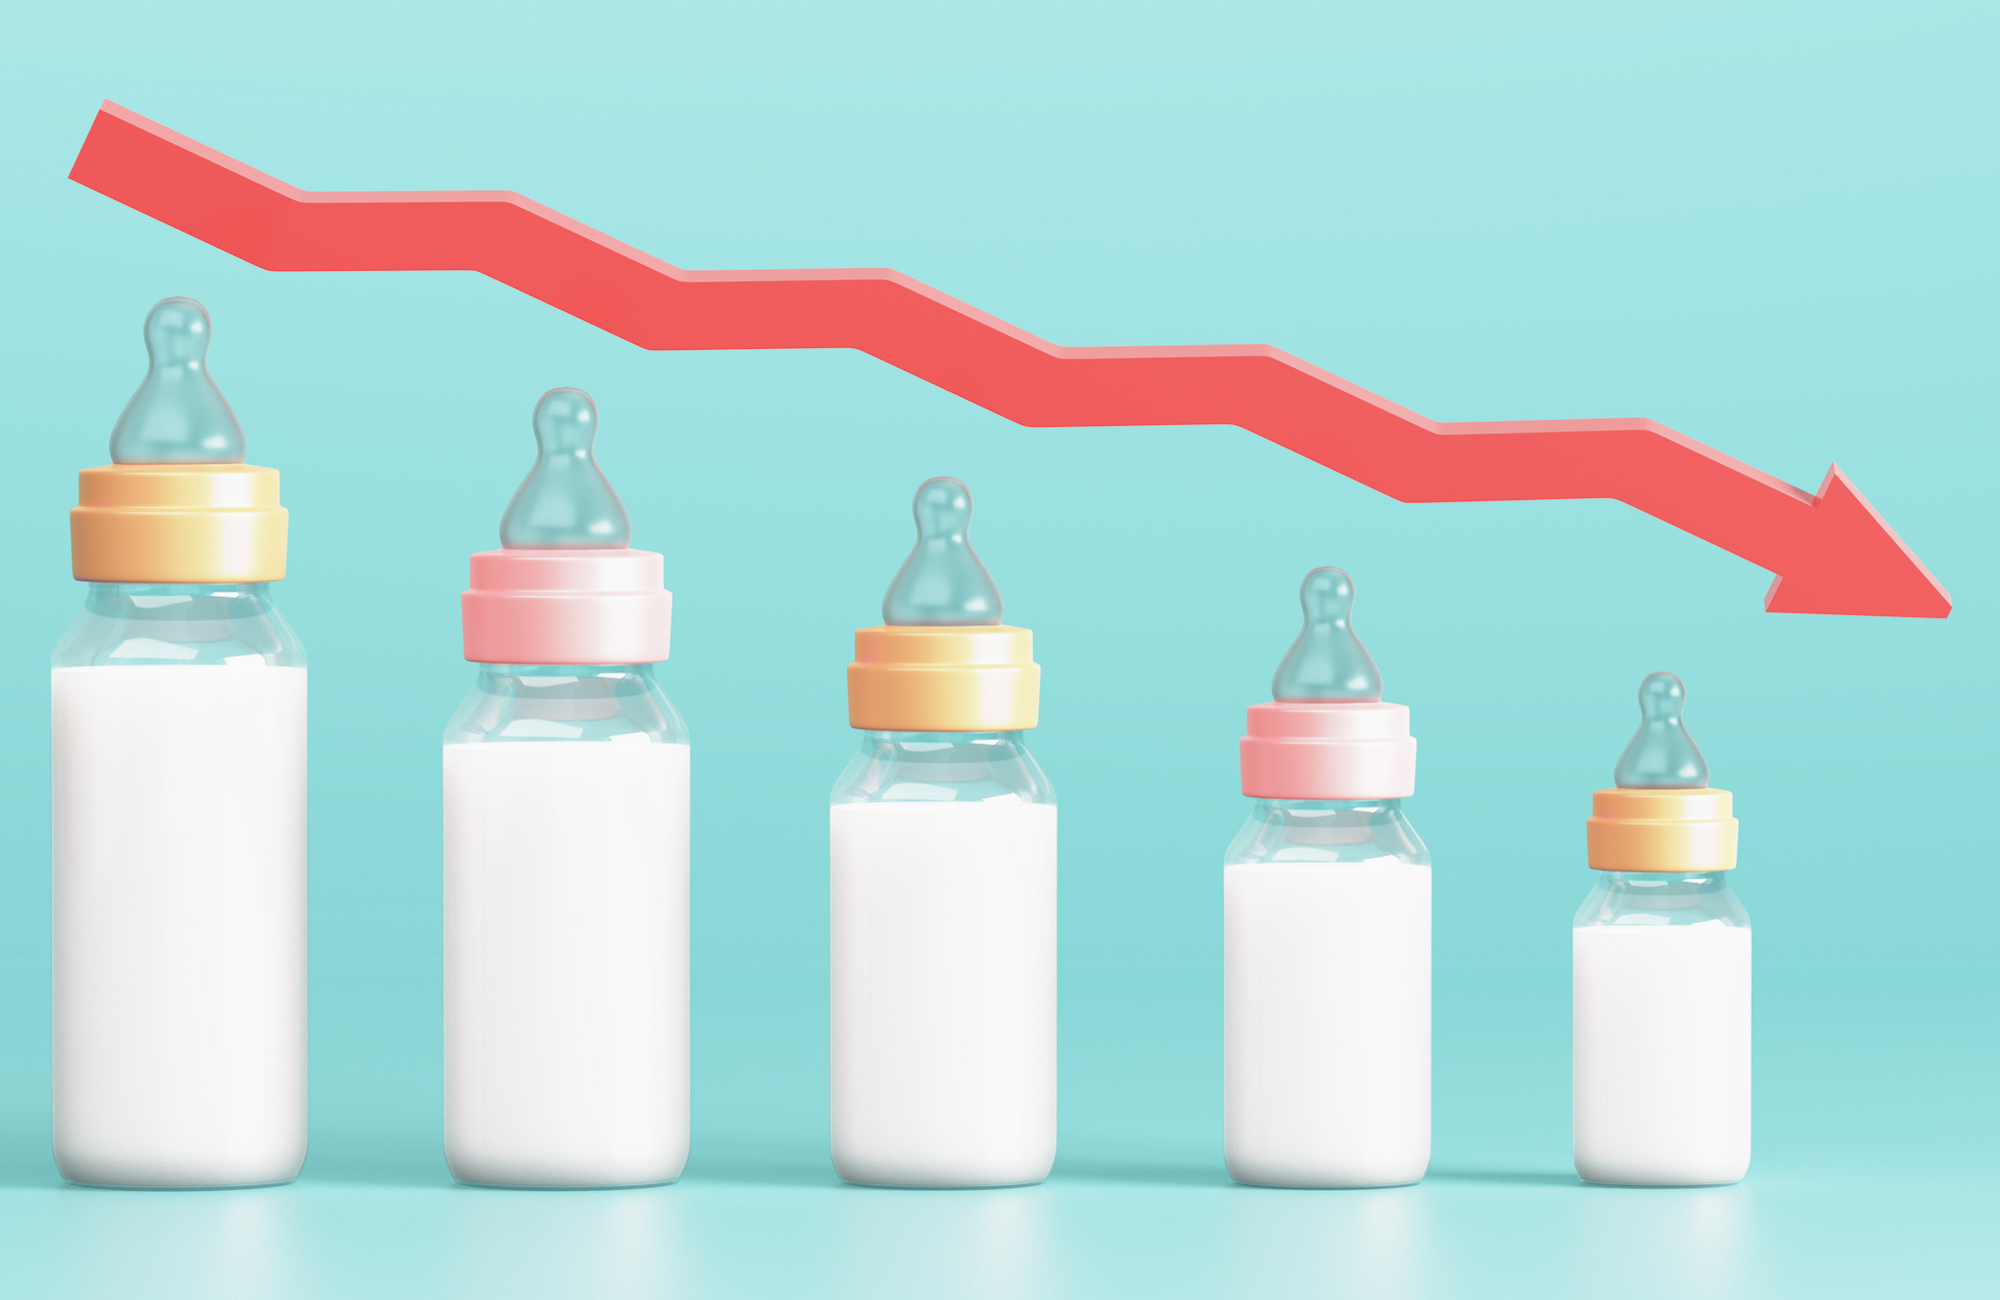 Artist rendering of fertility decline. Depopulation, demographic crisis. Baby bottles in the form of graph and down arrow.